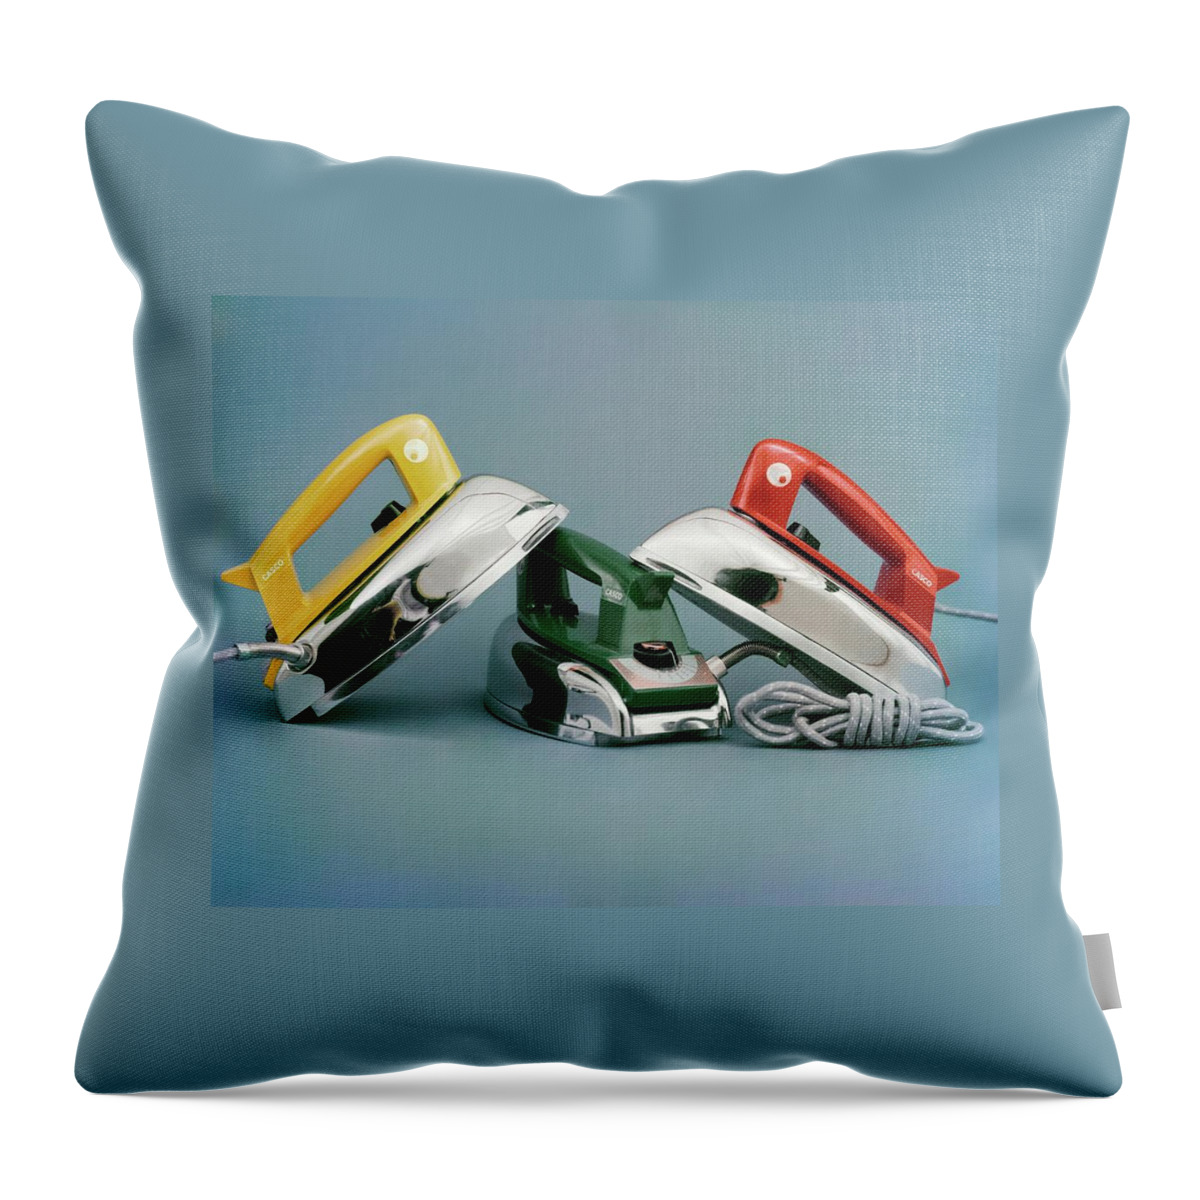 Three Irons By Casco Products Throw Pillow